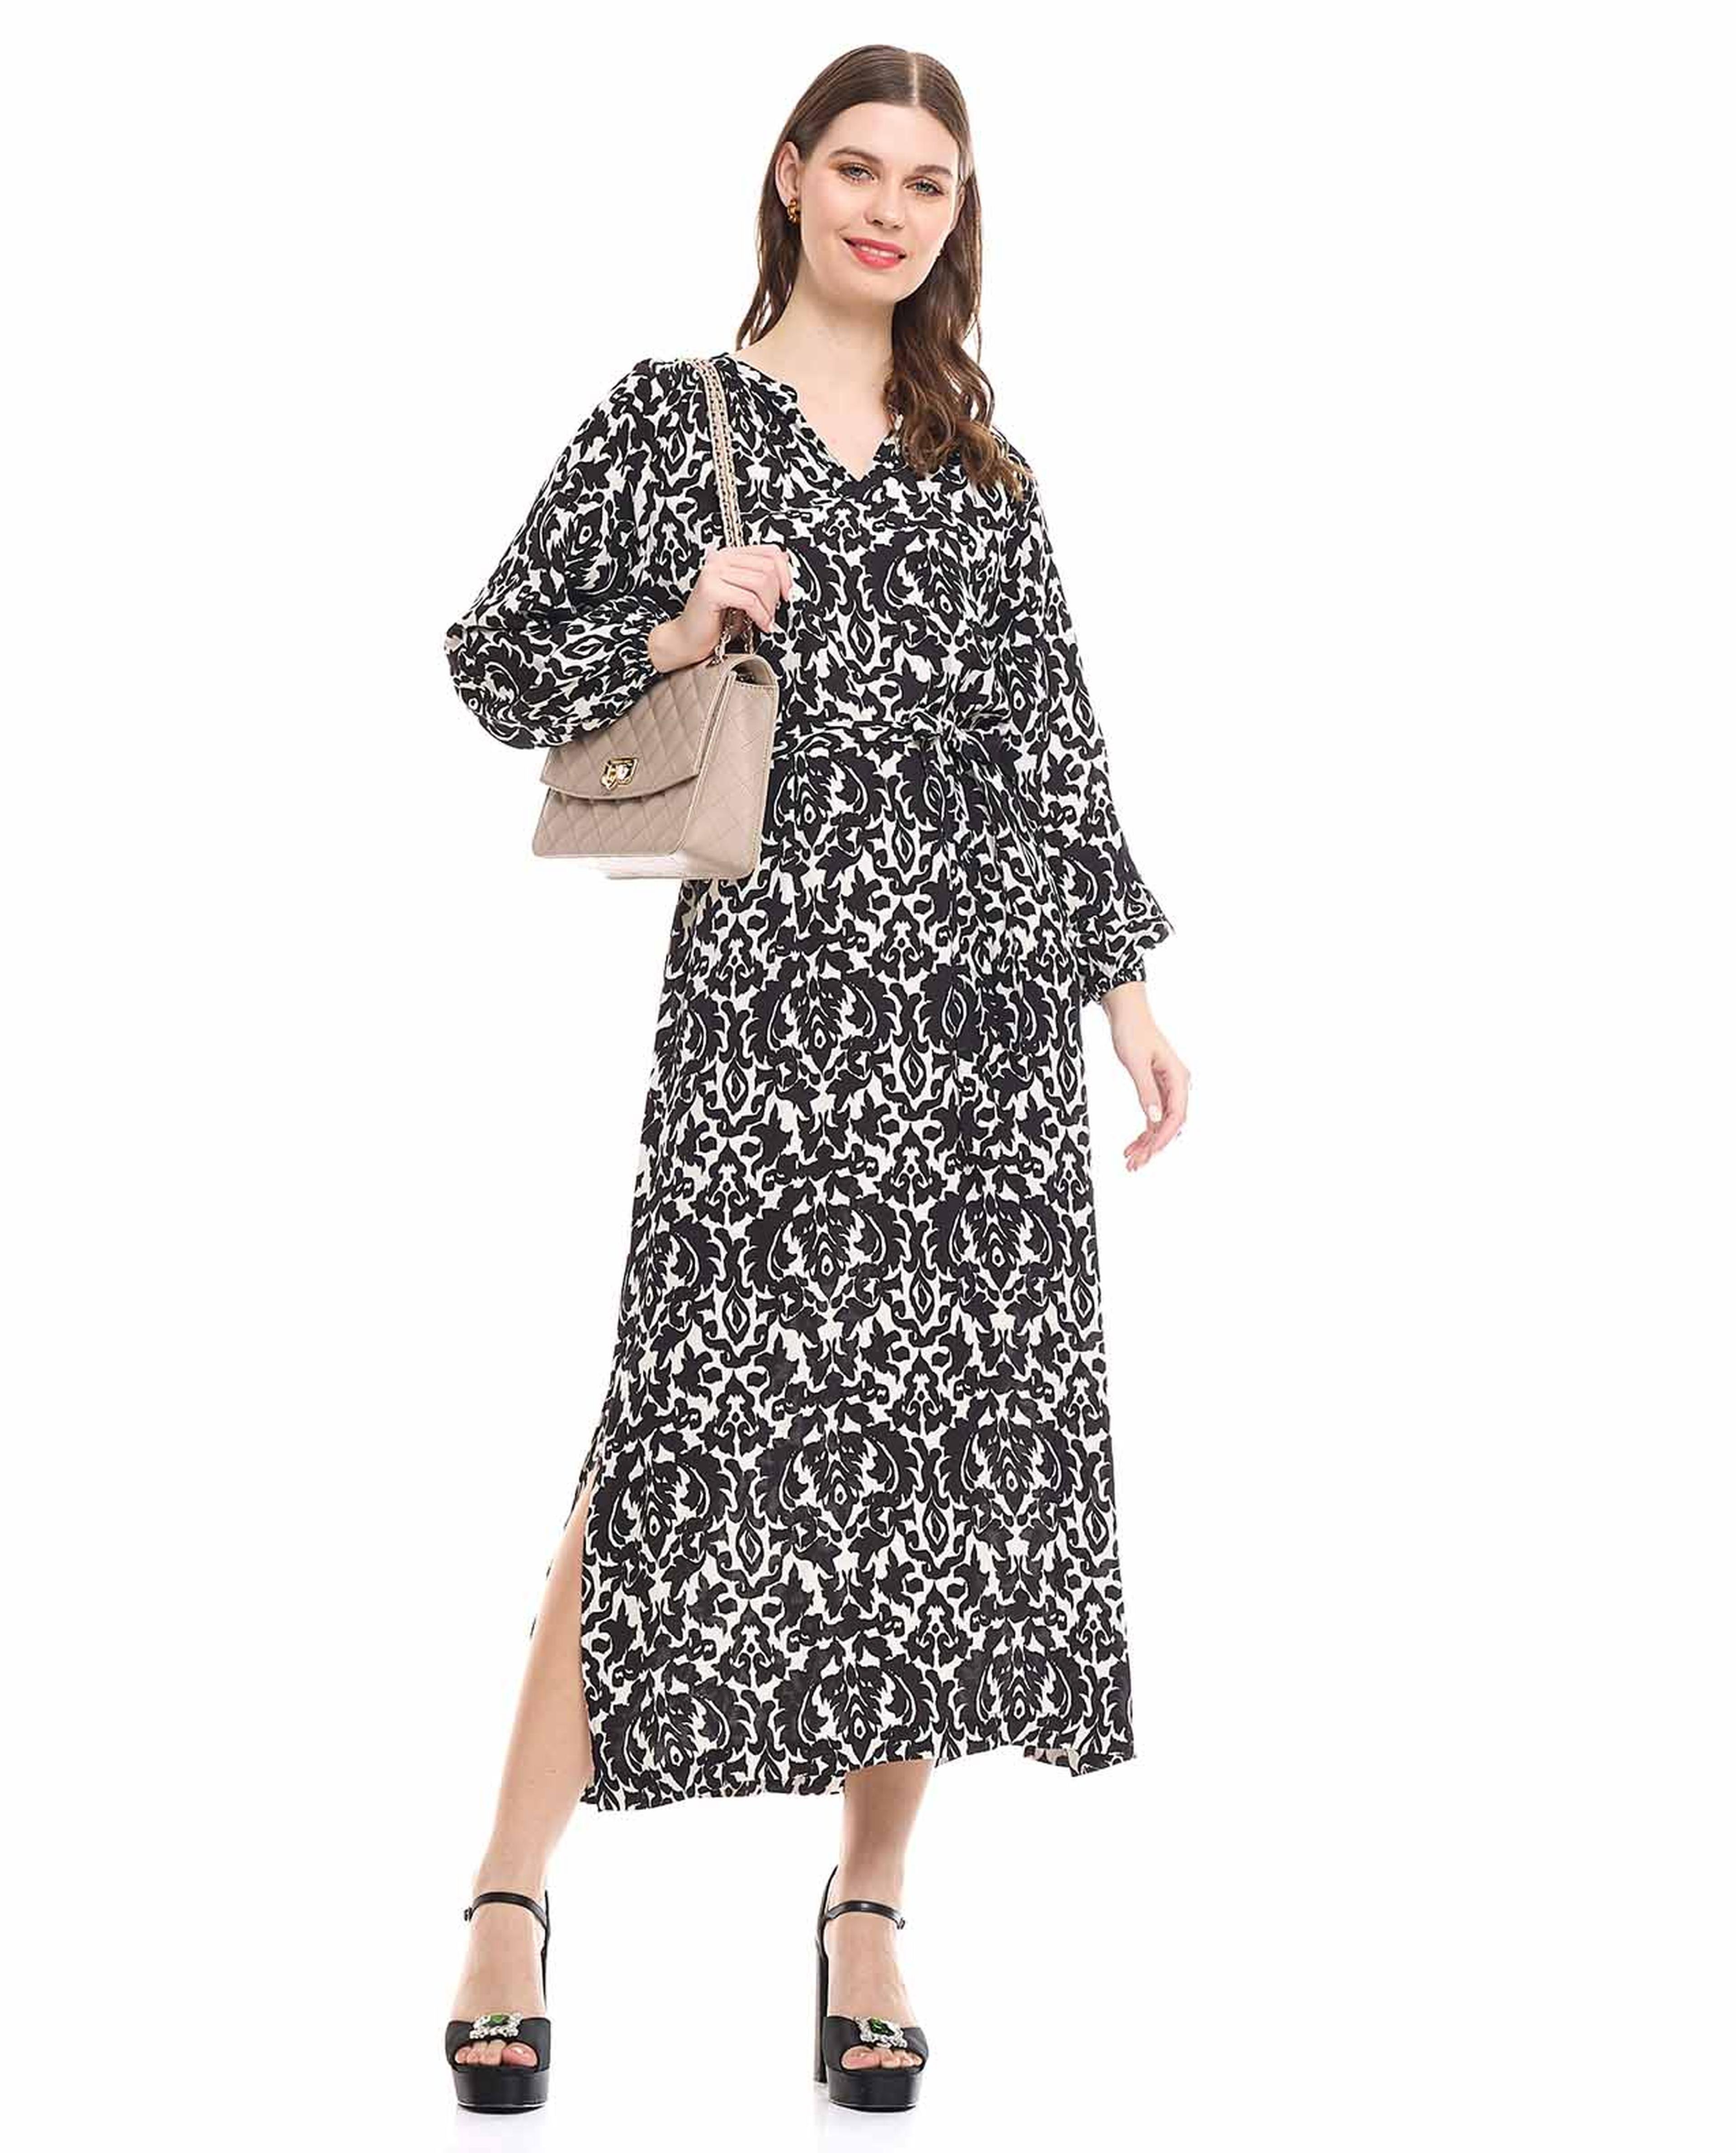 Patterned A-Line Dress with Stand Collar and Puff Sleeves